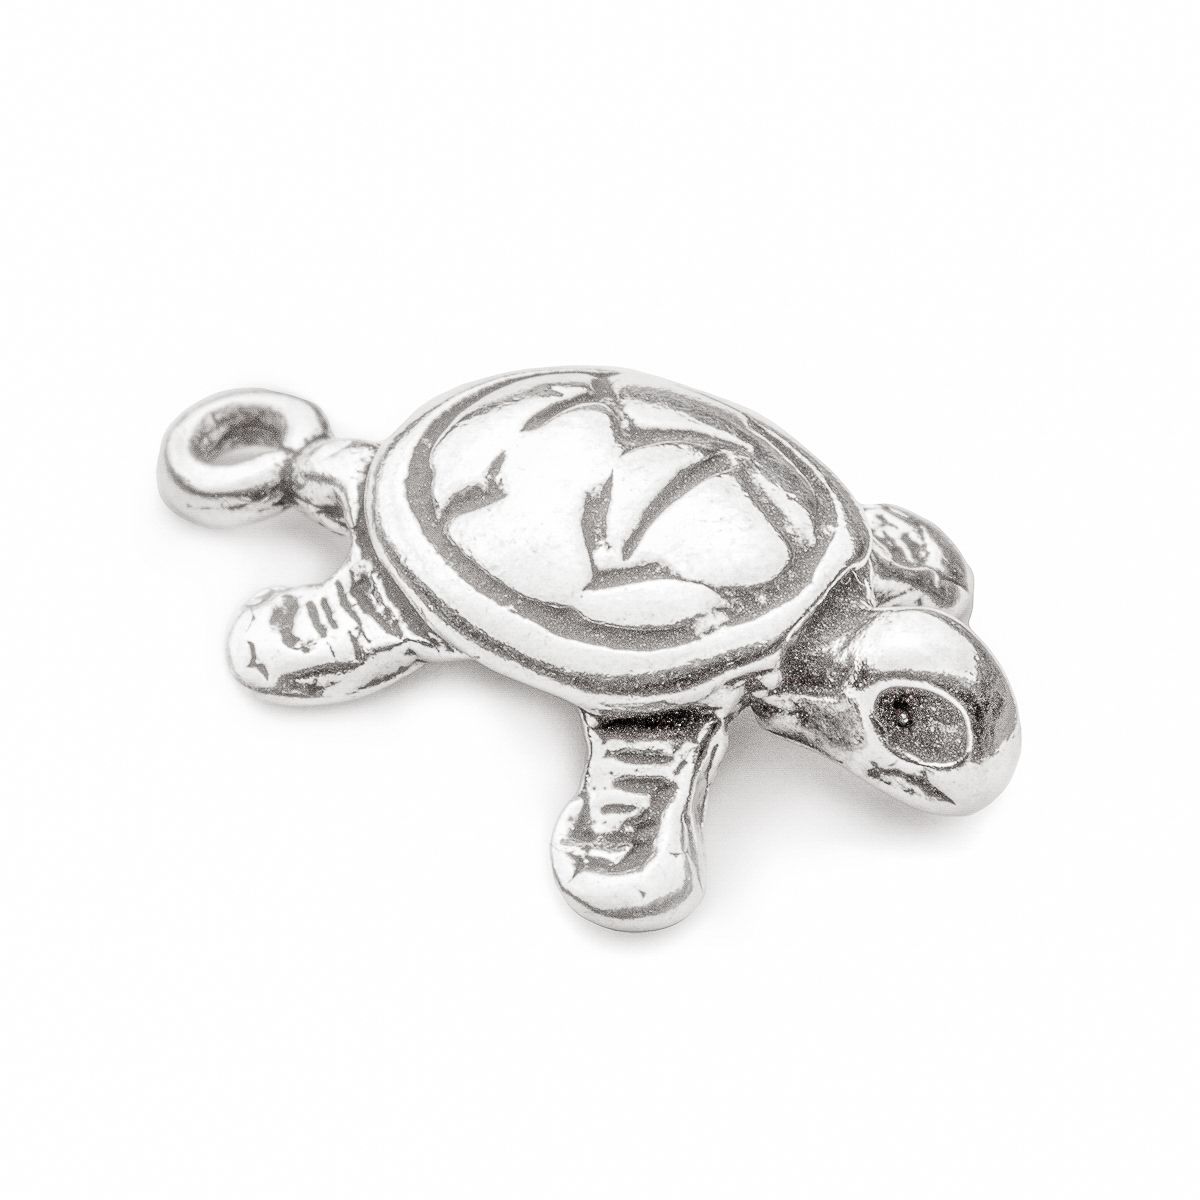 12 Good Luck Charms To Add To Your Jewellery